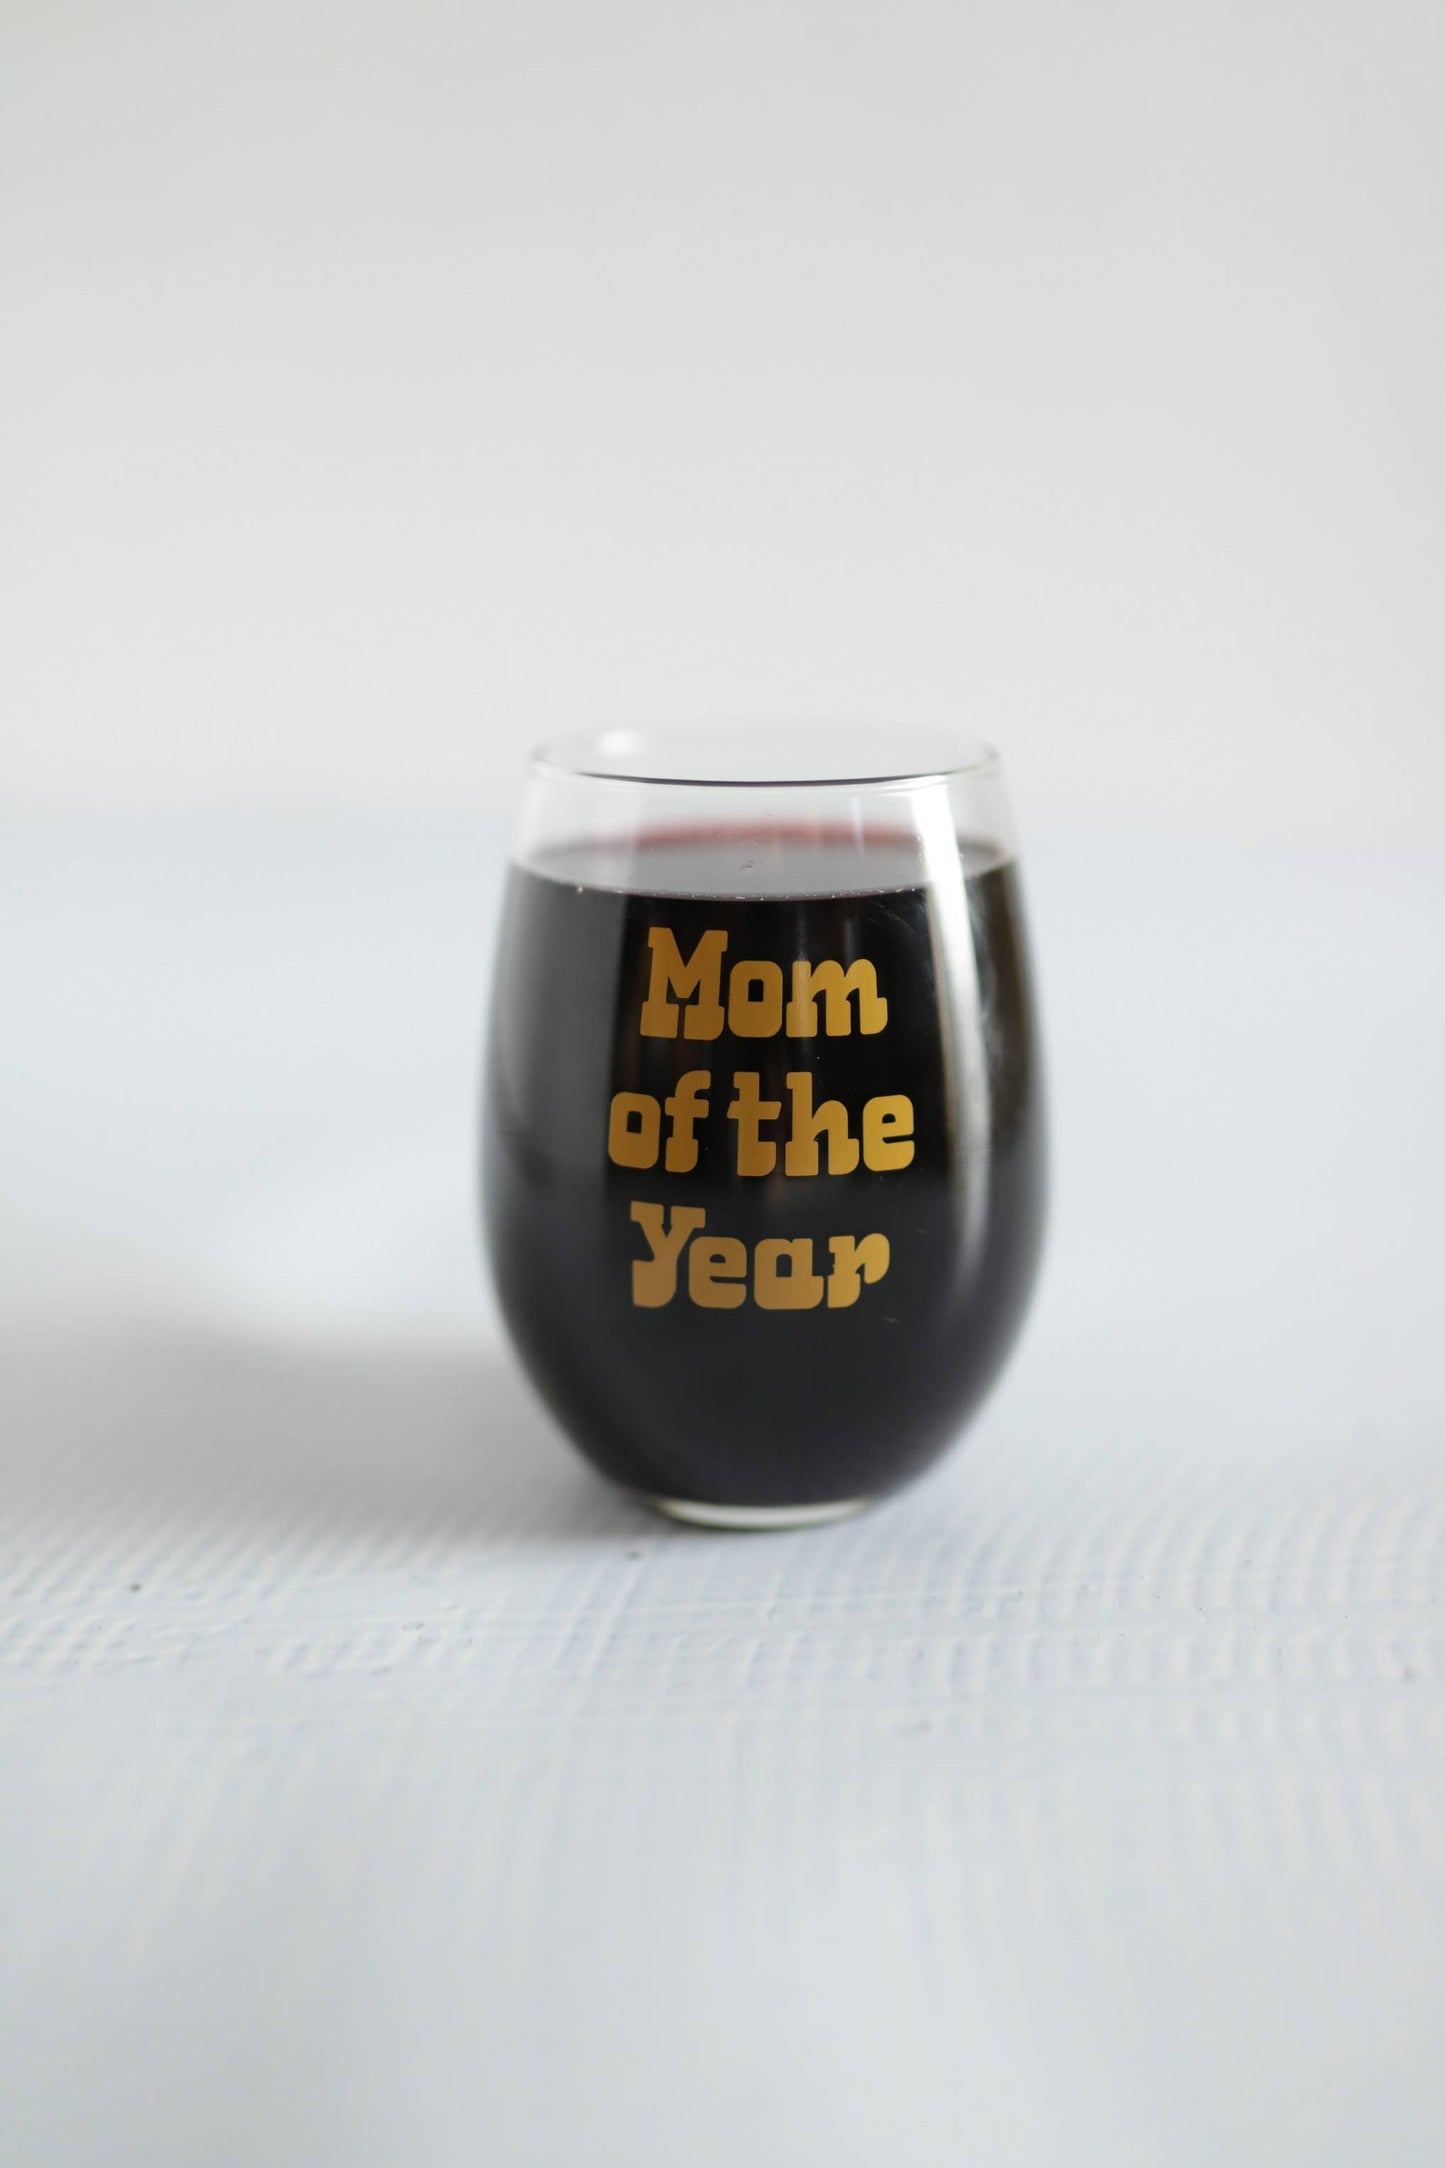 Mom Of the Year Printed Stemless Wine Glass